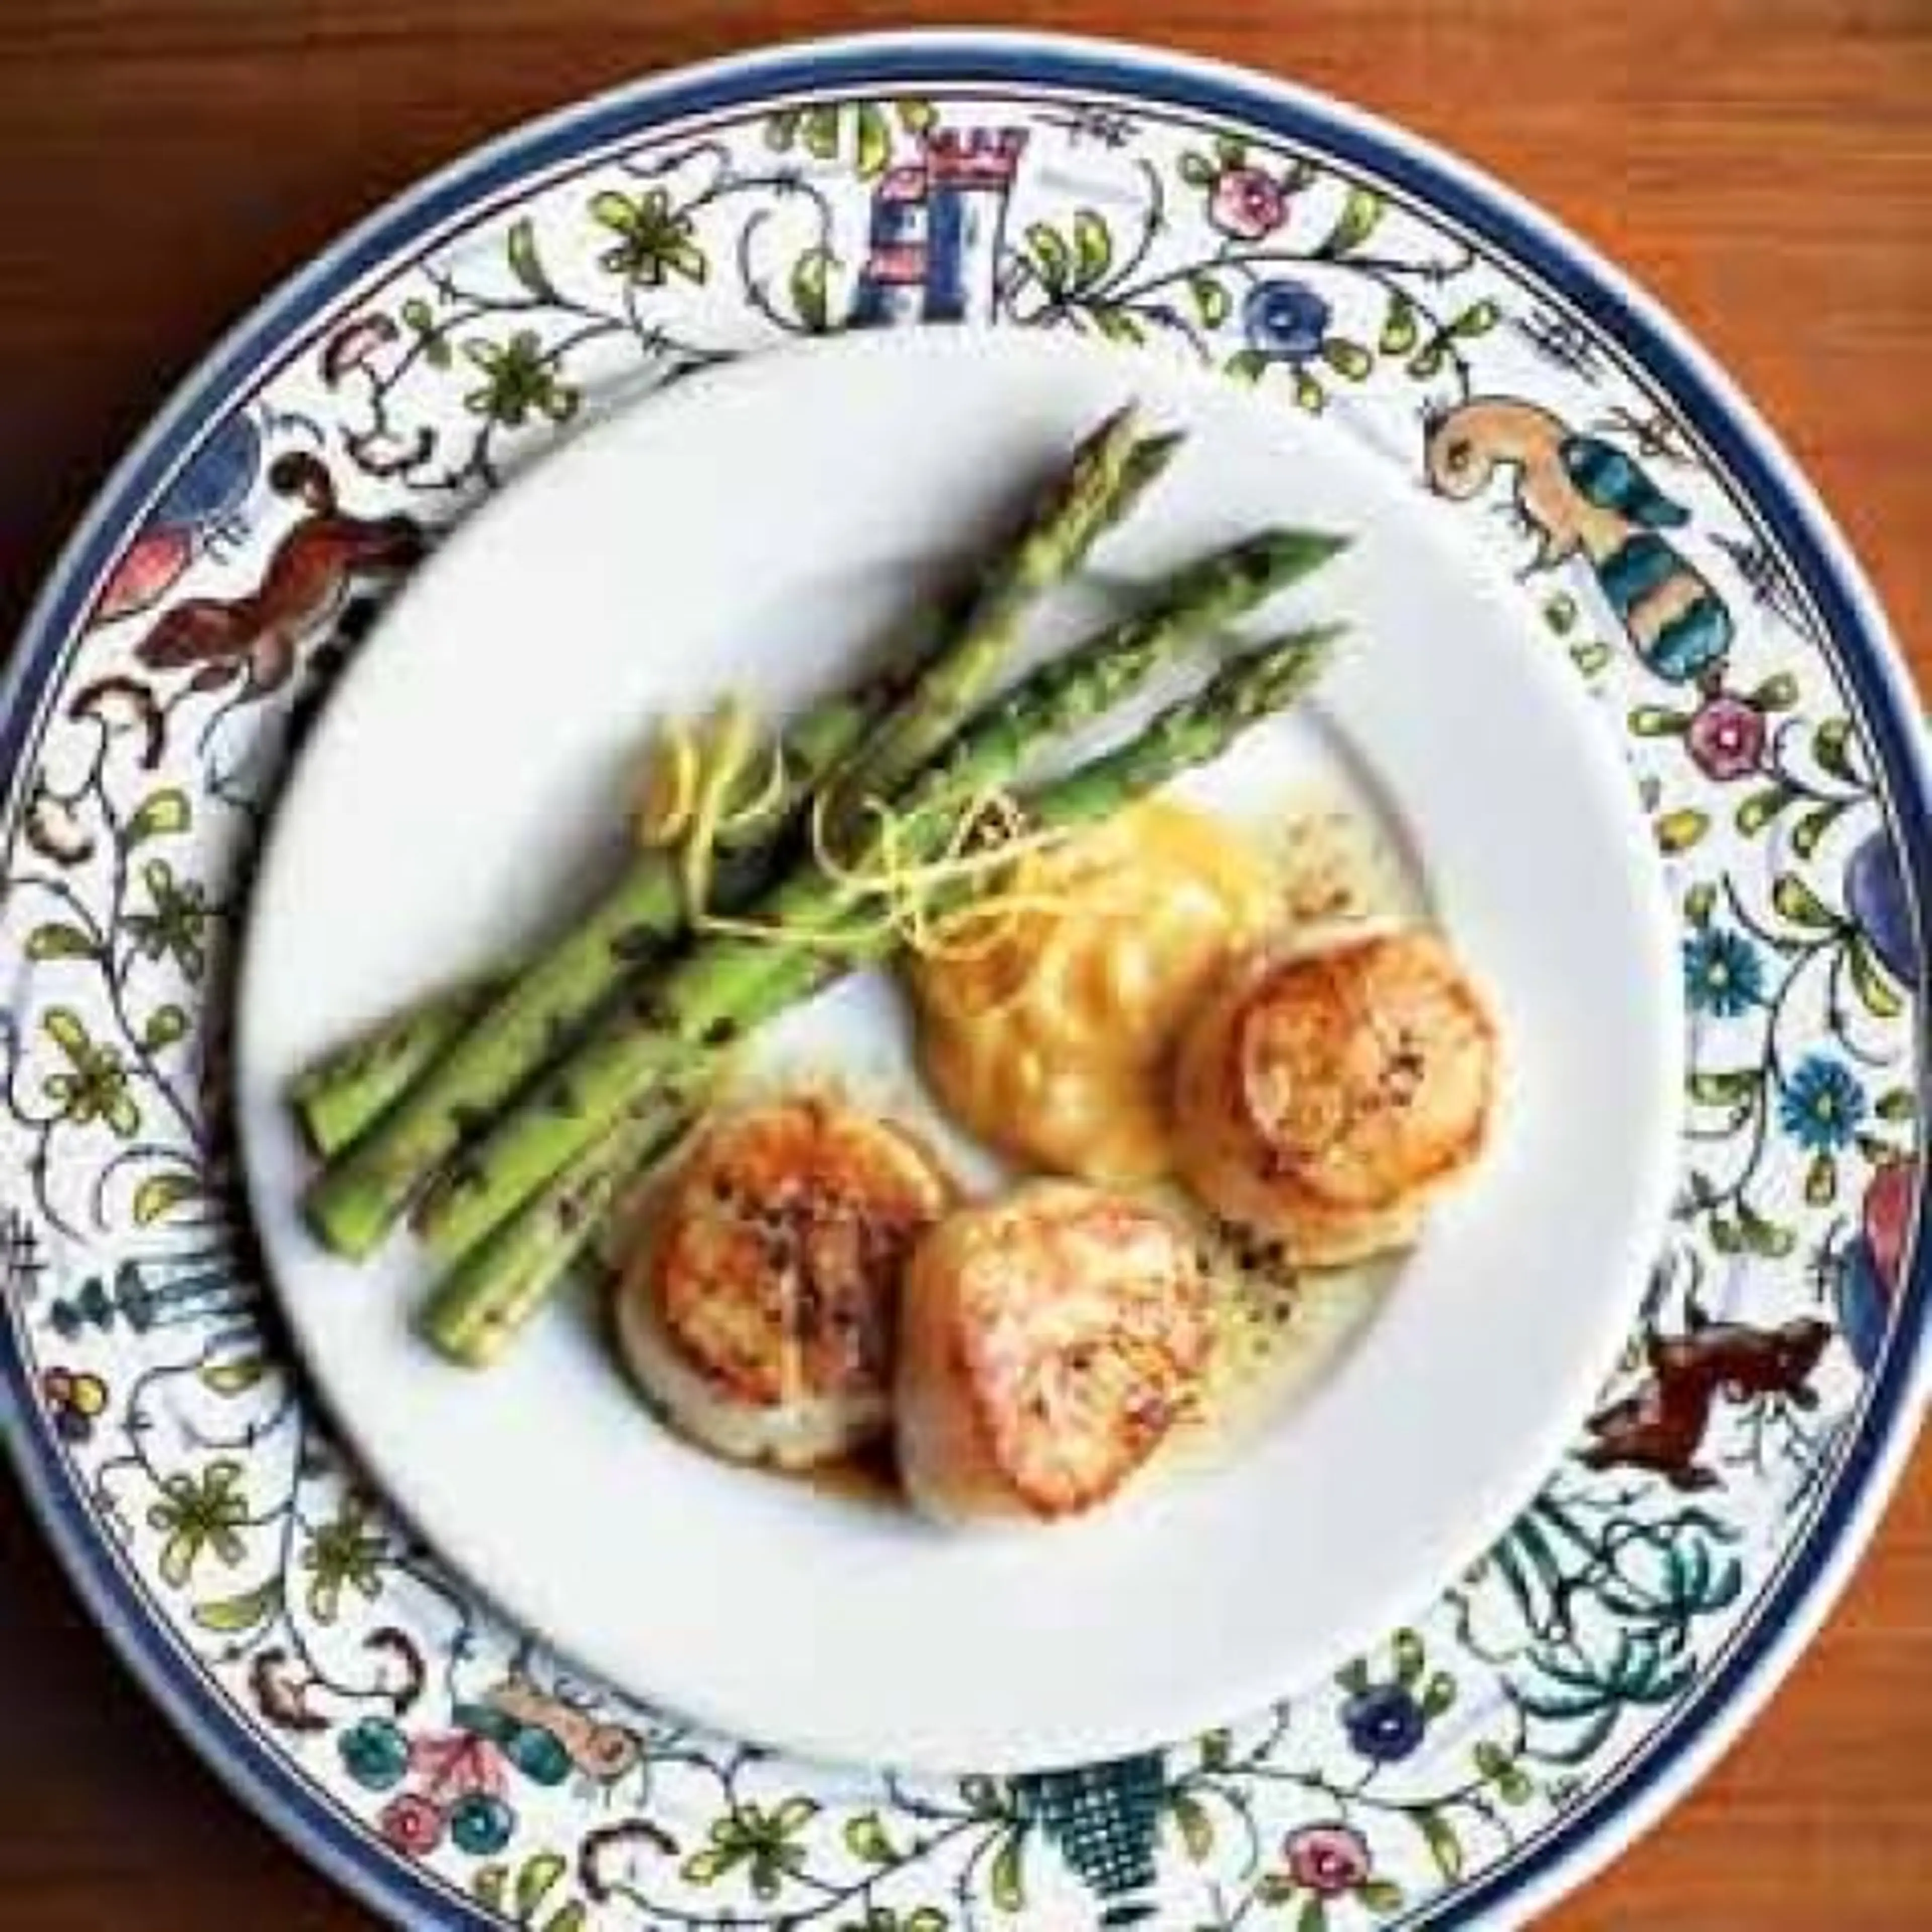 Seared Scallops with Spicy Aioli